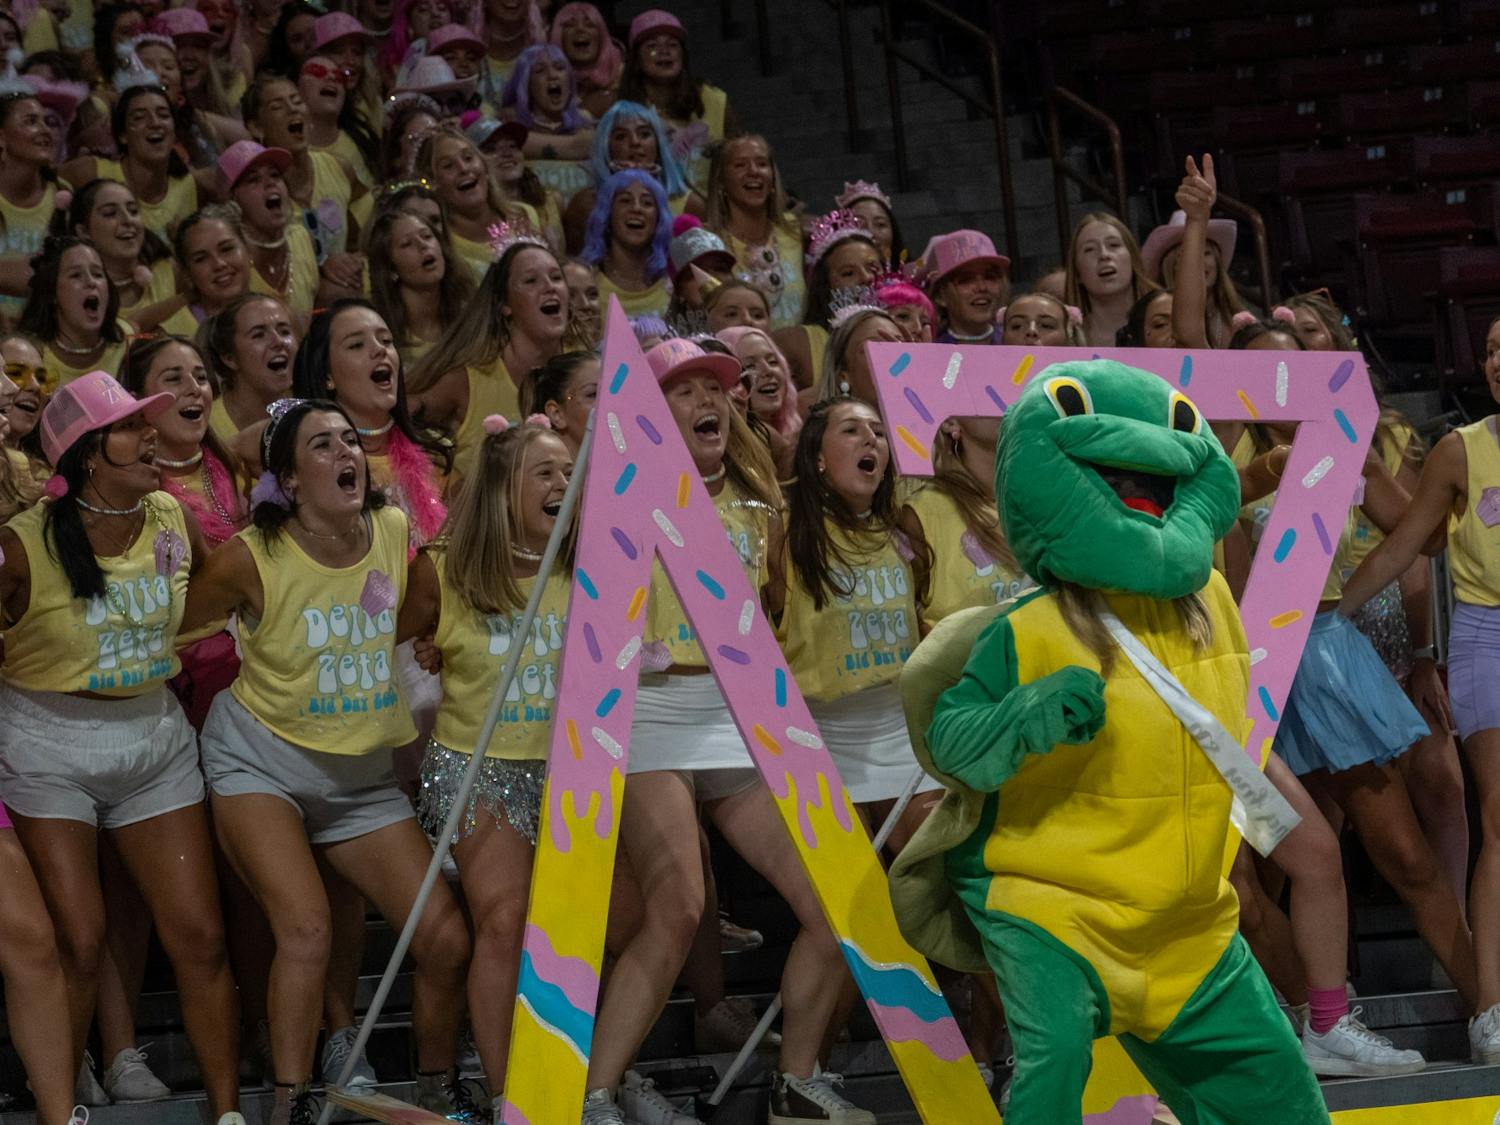 USC Sororities gathered Sunday afternoon, Aug. 21, 2022 at the Colonial Life Arena for Bid Day. Several chapters dressed up in matching uniforms and costumes to celebrate new members.